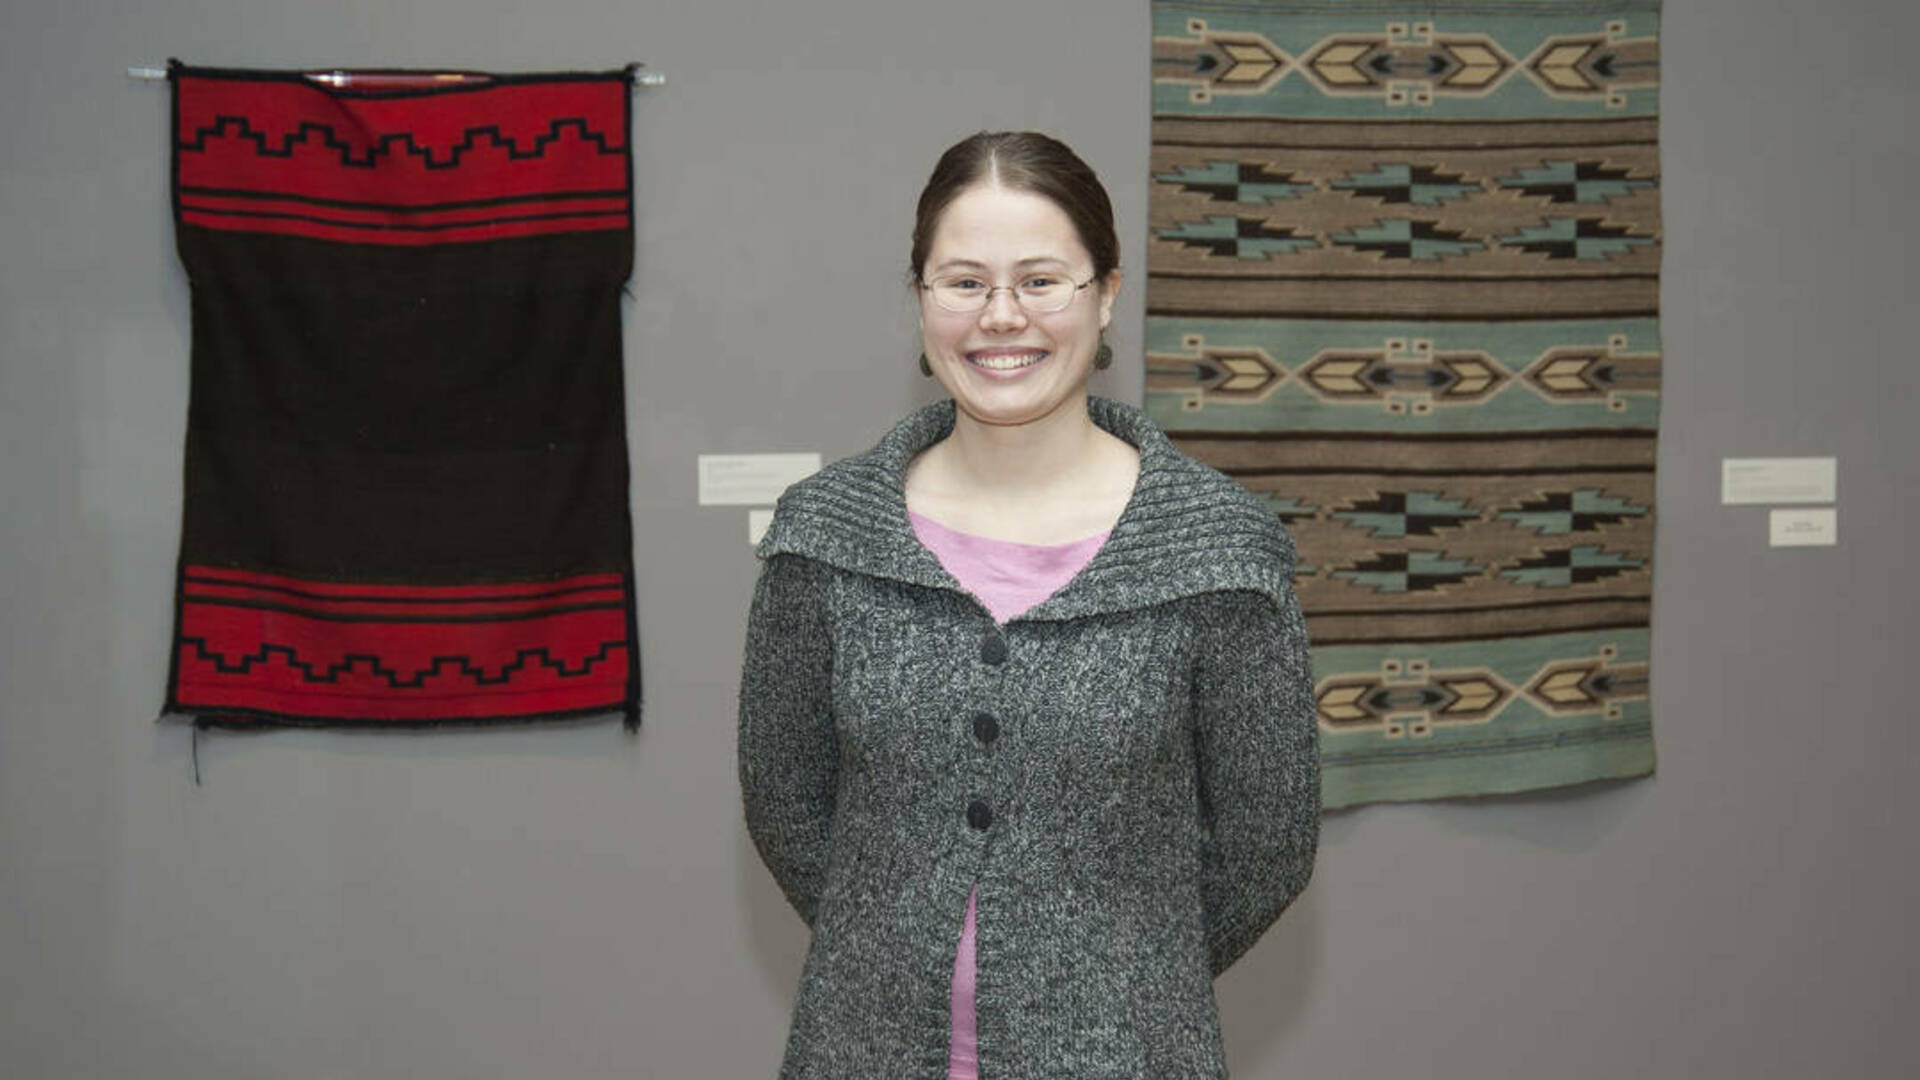 Kasey Kendall, an ND student who participated in Prof. Joanne Mack's 2011 class that curated an exhibition. She stands next to the display of Native American objects that she selected, researched and described in exhibition text panels and labels